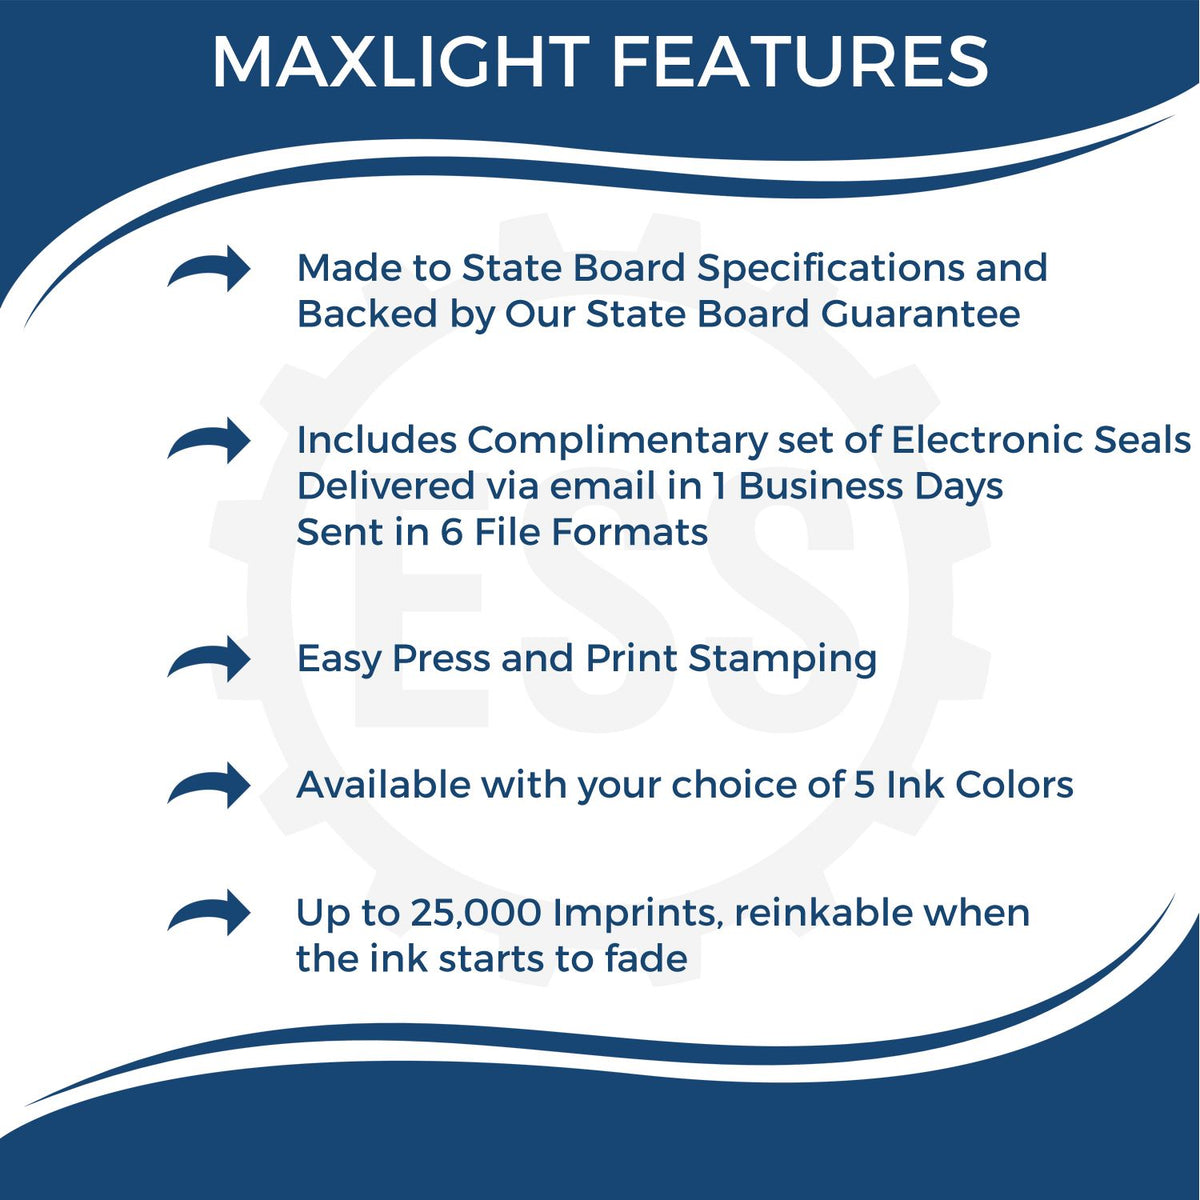 A picture of an infographic highlighting the selling points for the Premium MaxLight Pre-Inked Massachusetts Landscape Architectural Stamp